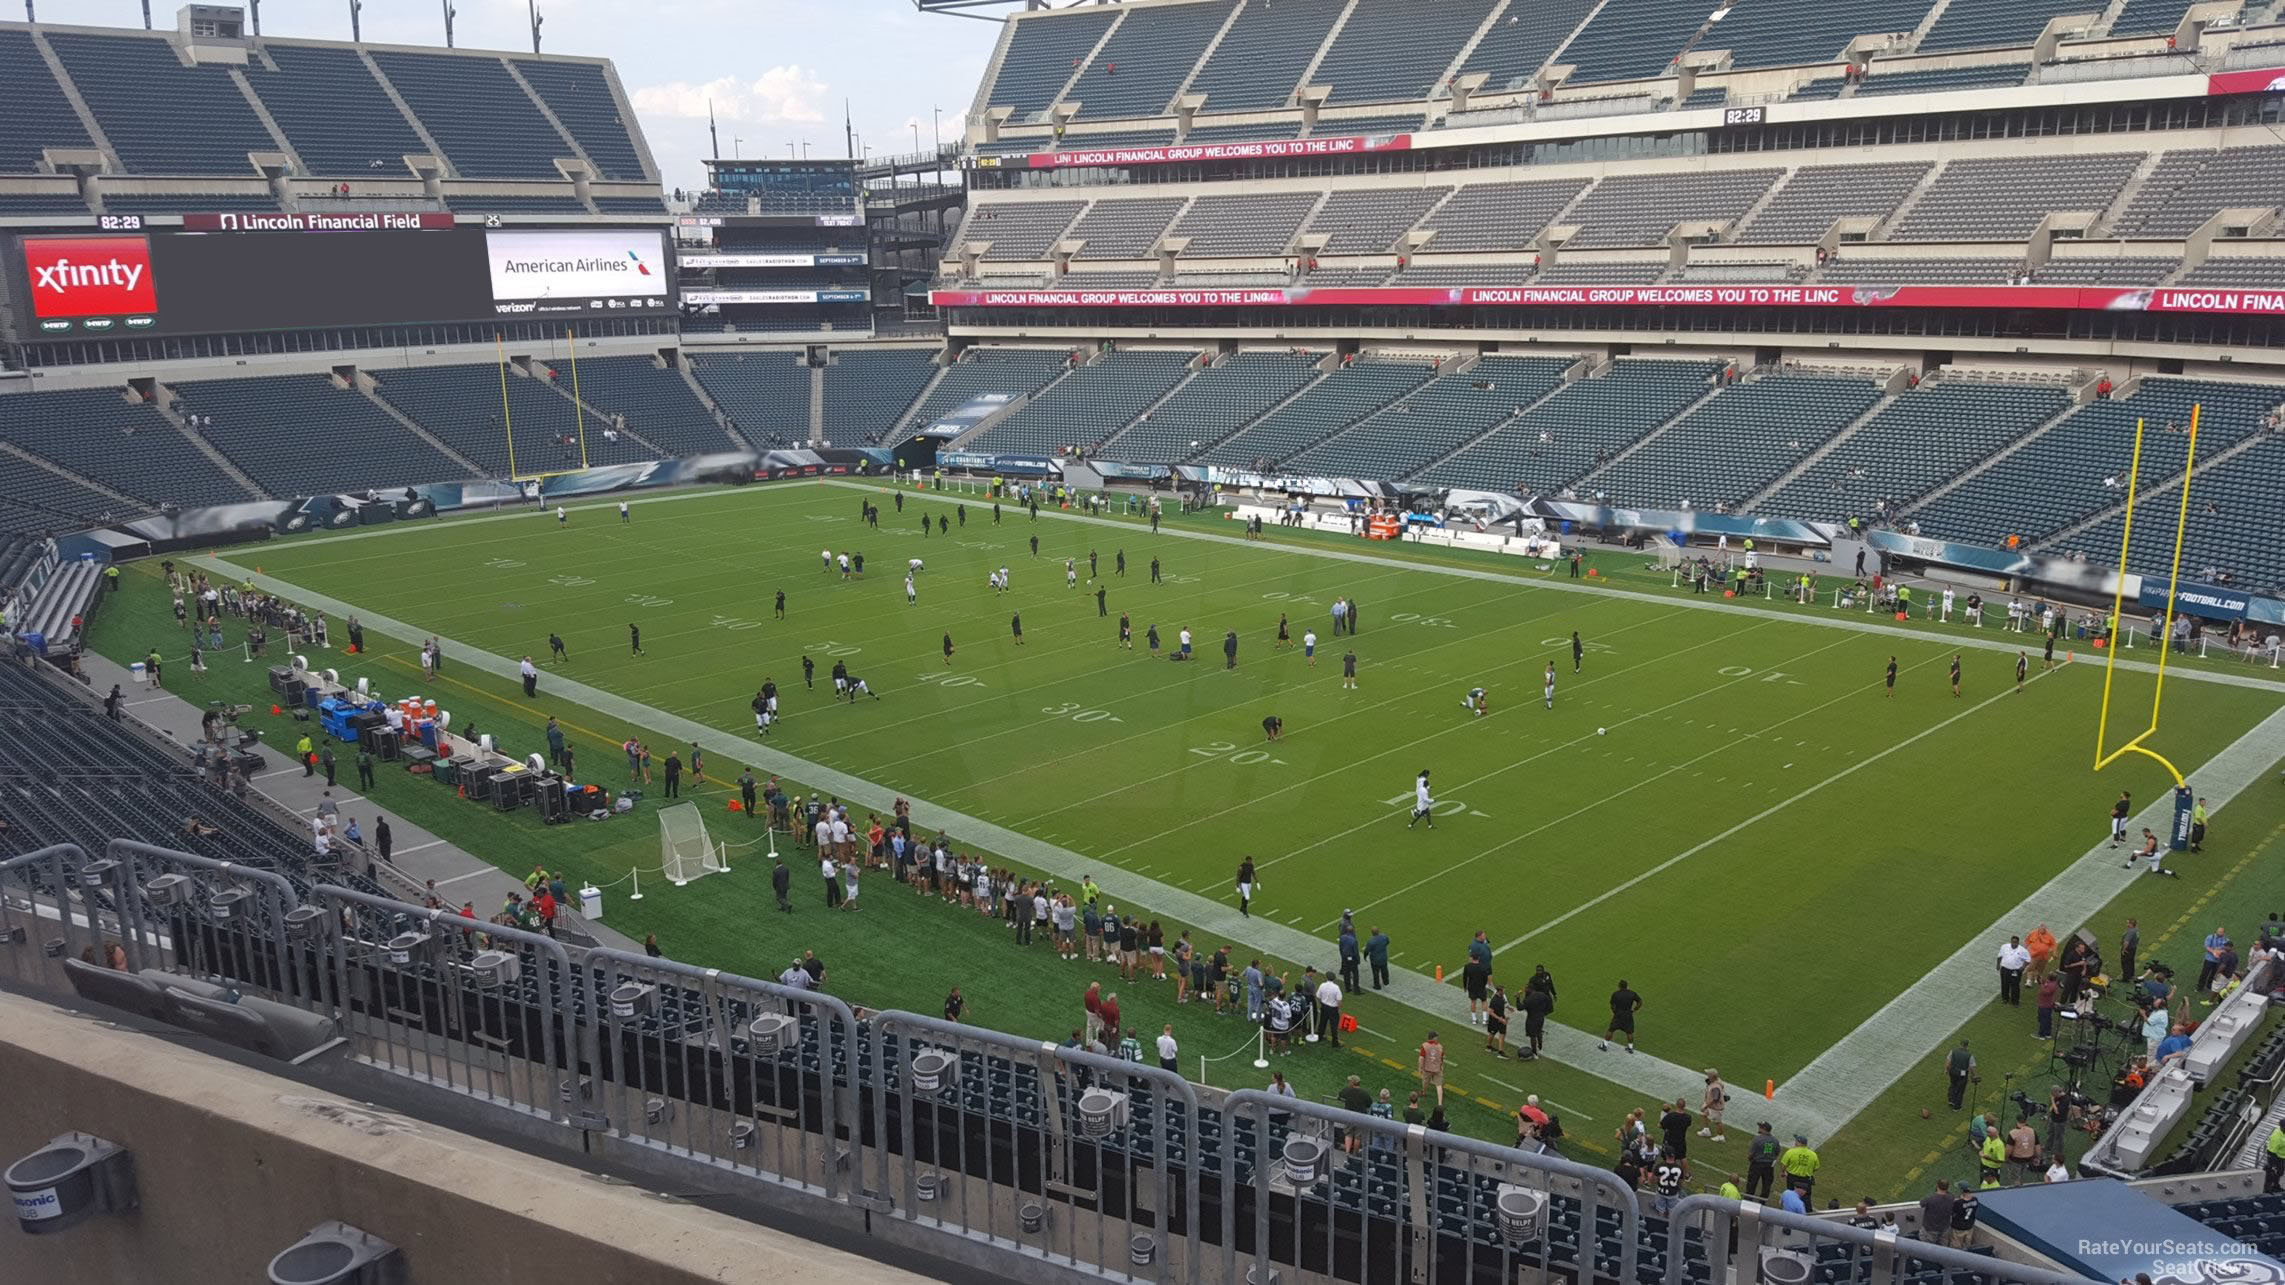 section c6, row 7 seat view  for football - lincoln financial field